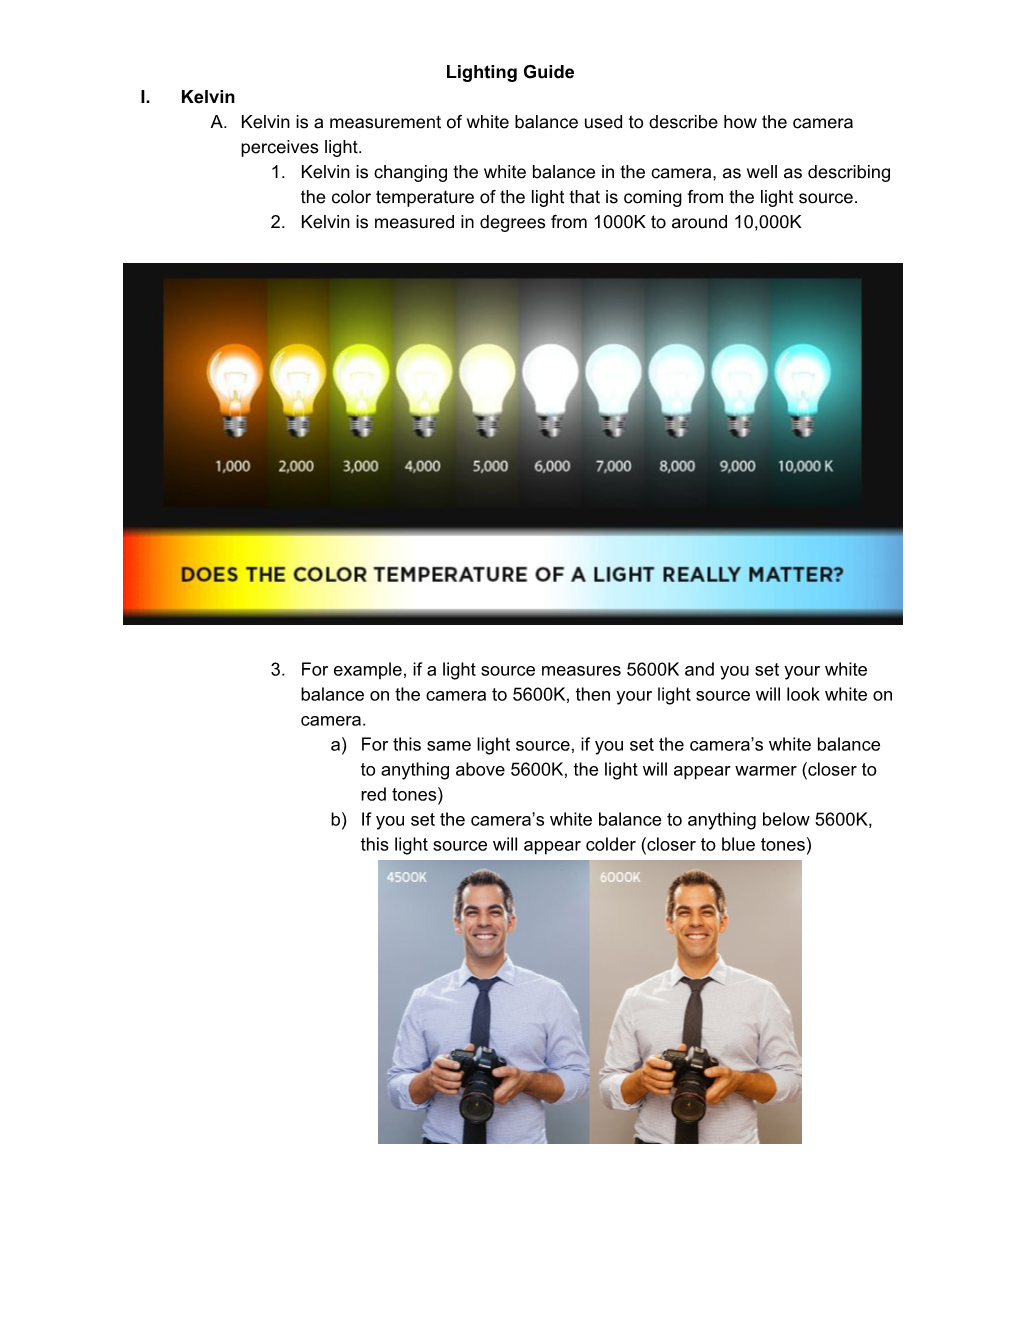 Lighting Guide I. Kelvin A. Kelvin Is a Measurement of White Balance Used to Describe How the Camera Perceives Light